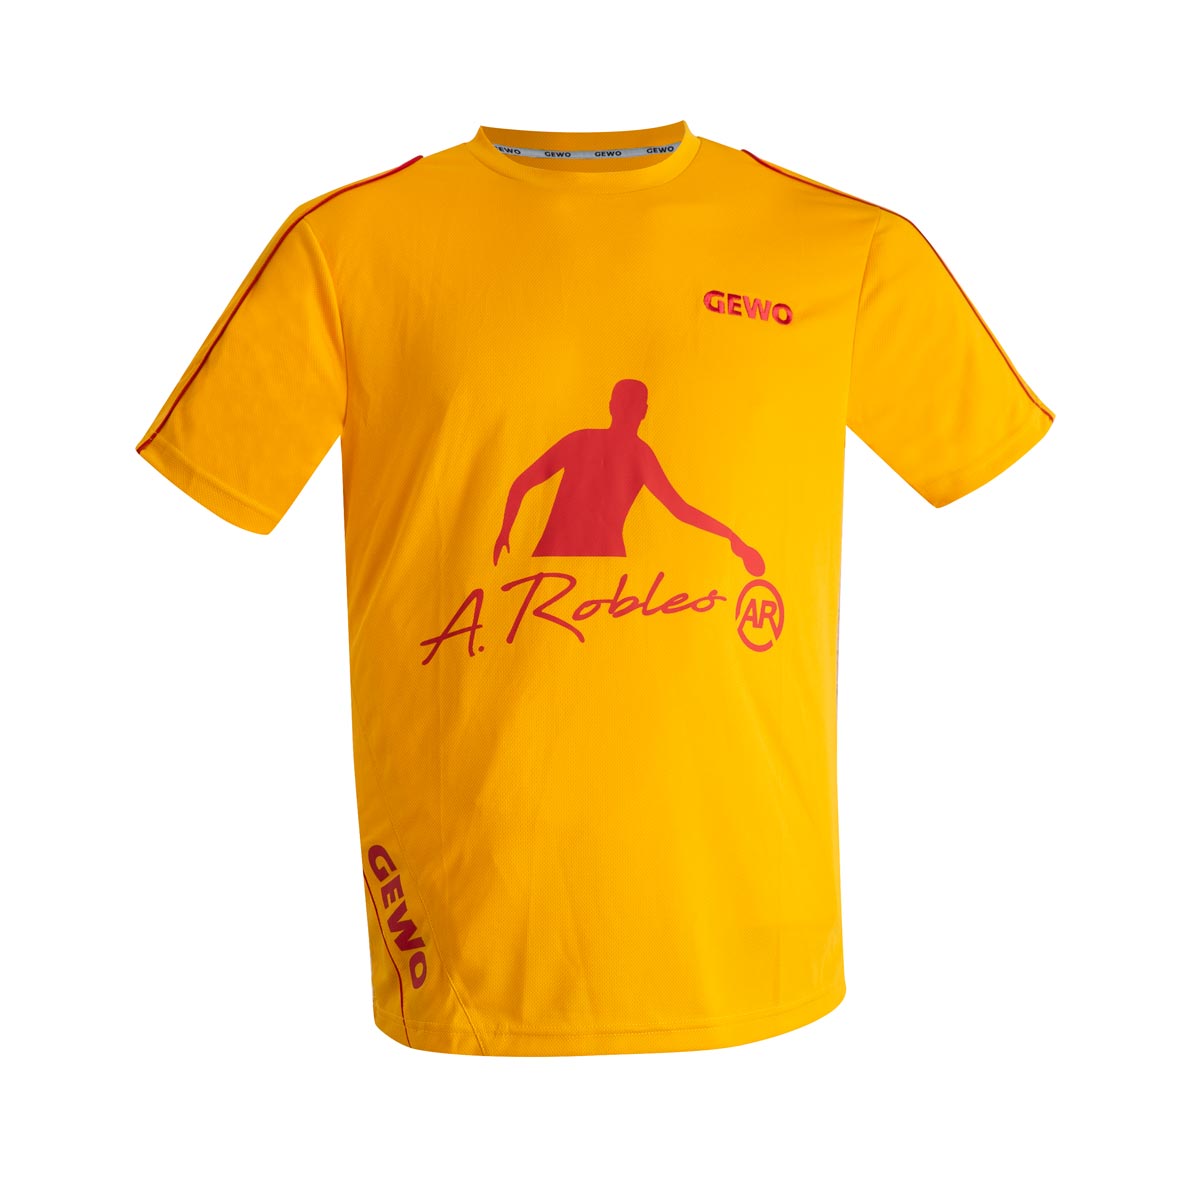 GEWO T-Shirt Promotion Robles gelb/rot S